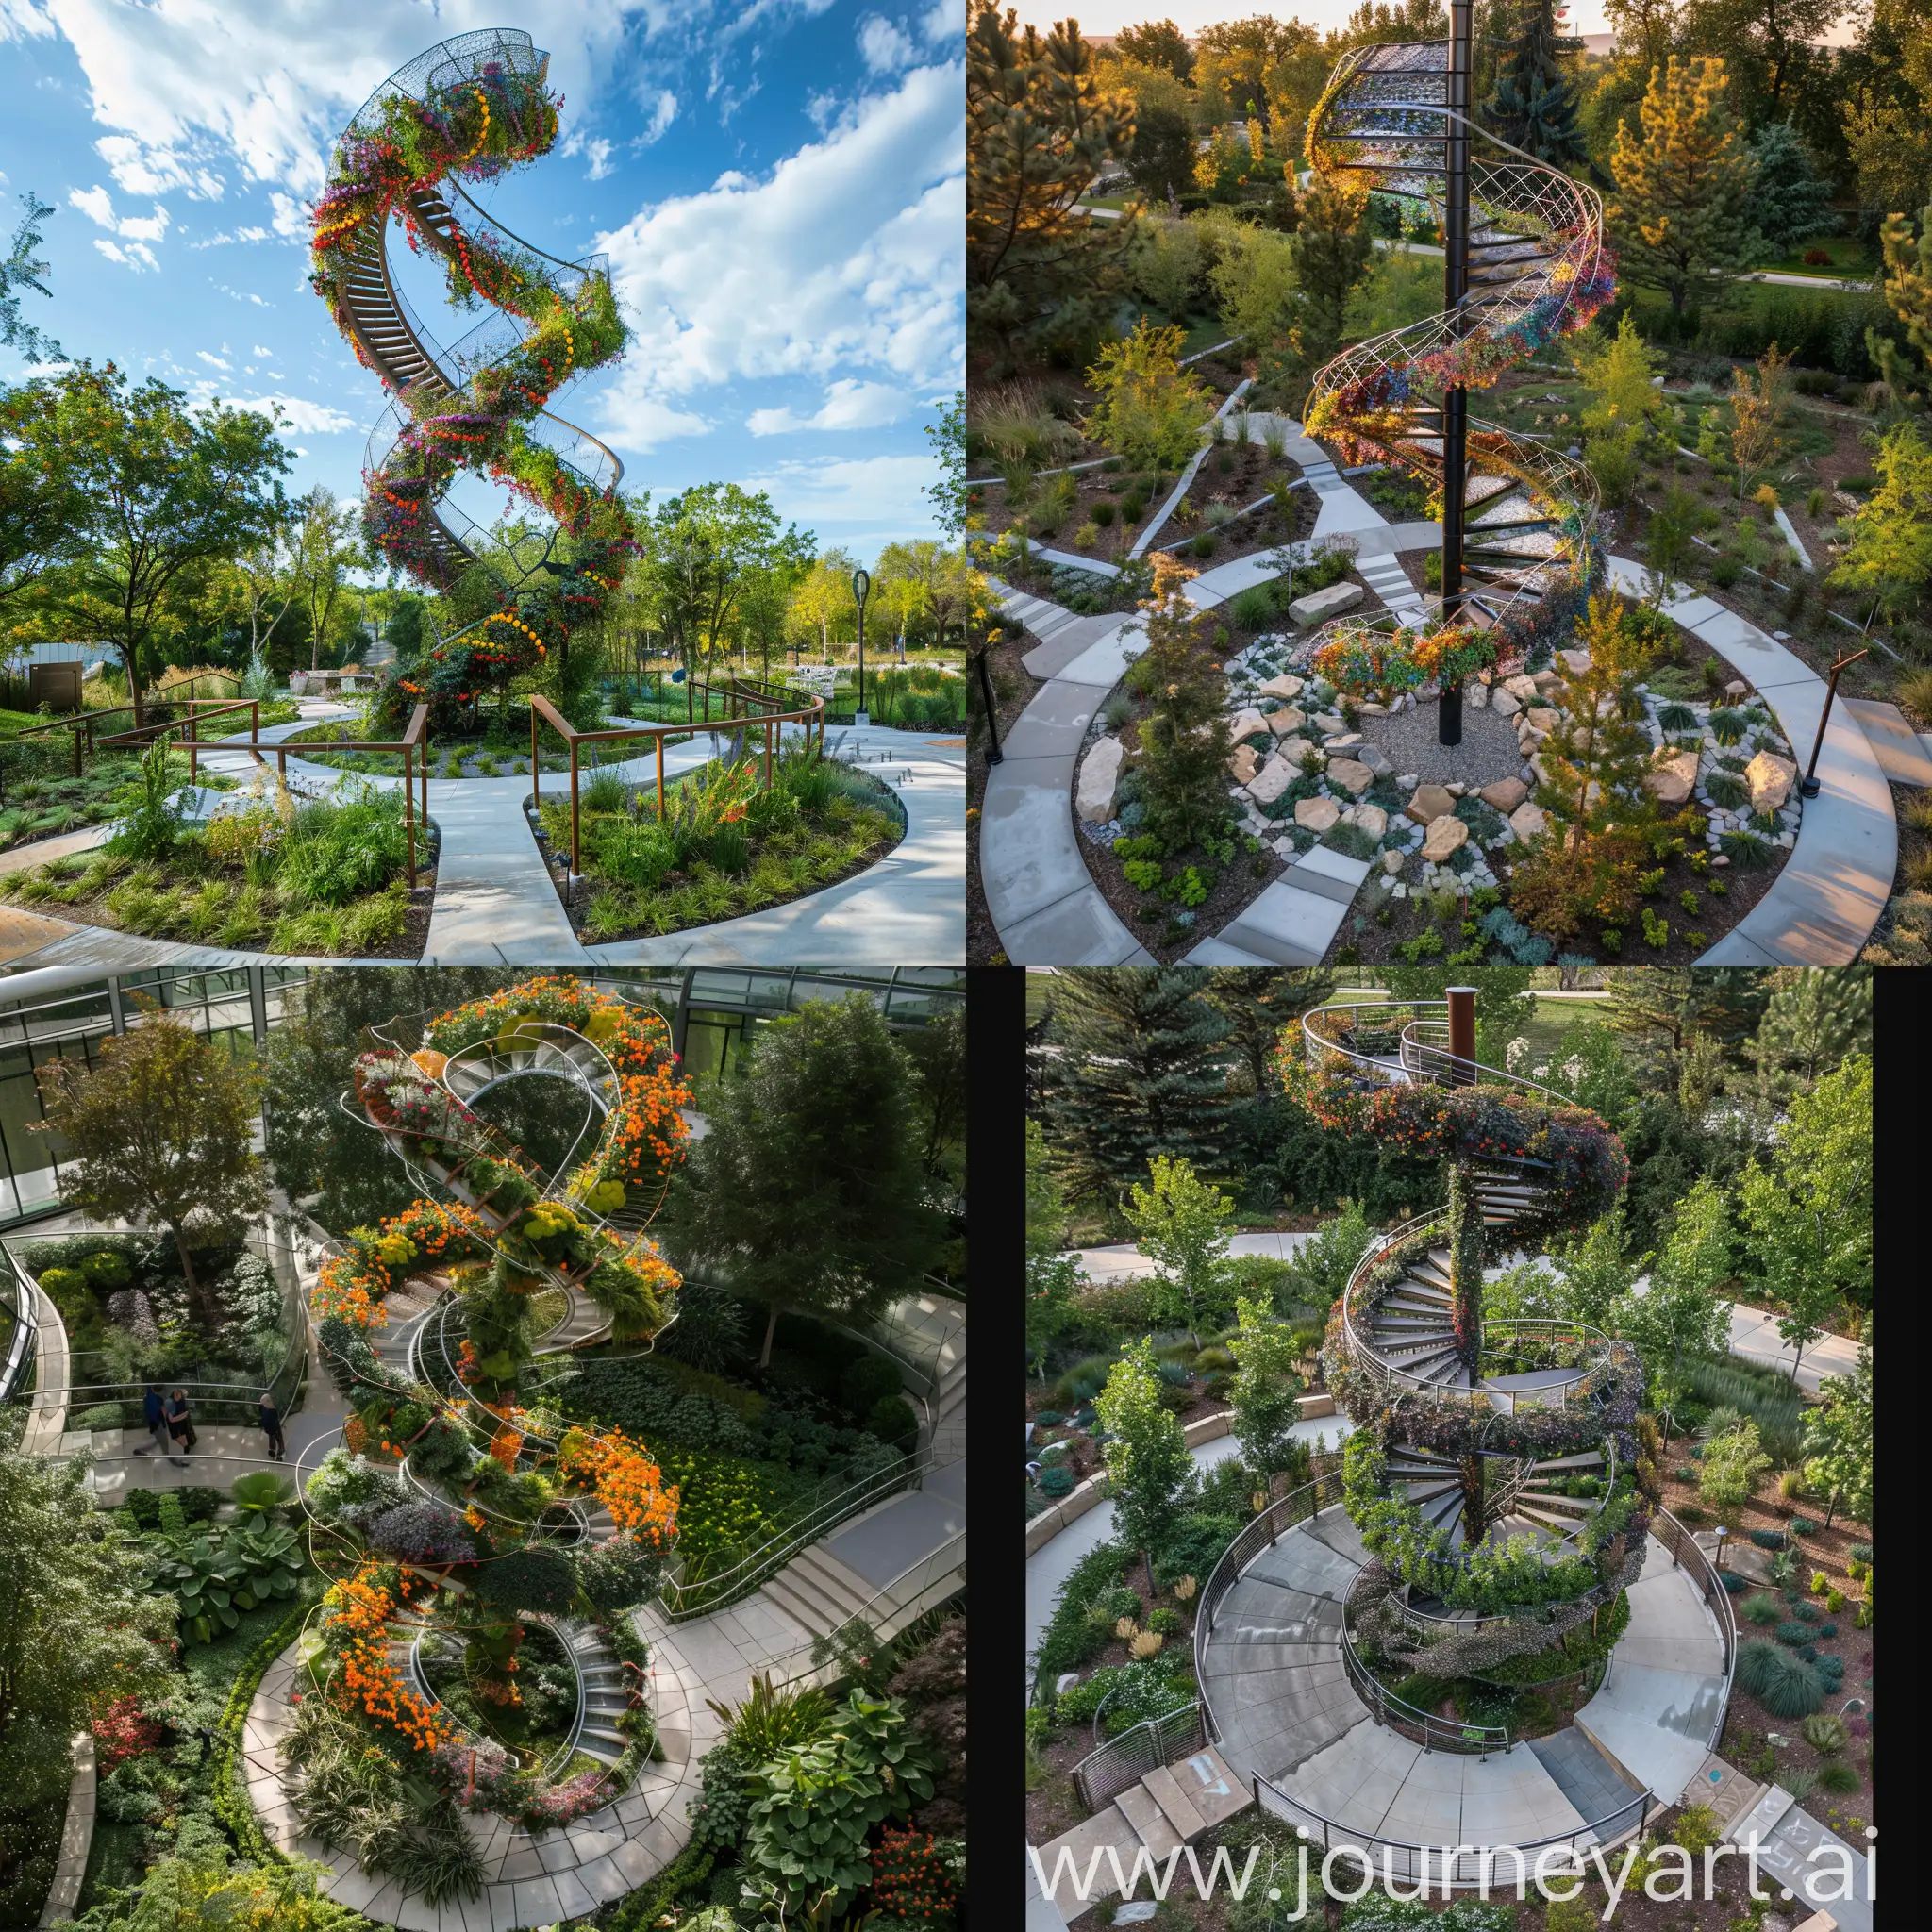 DNA-Helix-Sculpture-in-Landscaped-Gardens-with-Interactive-Art-Pieces